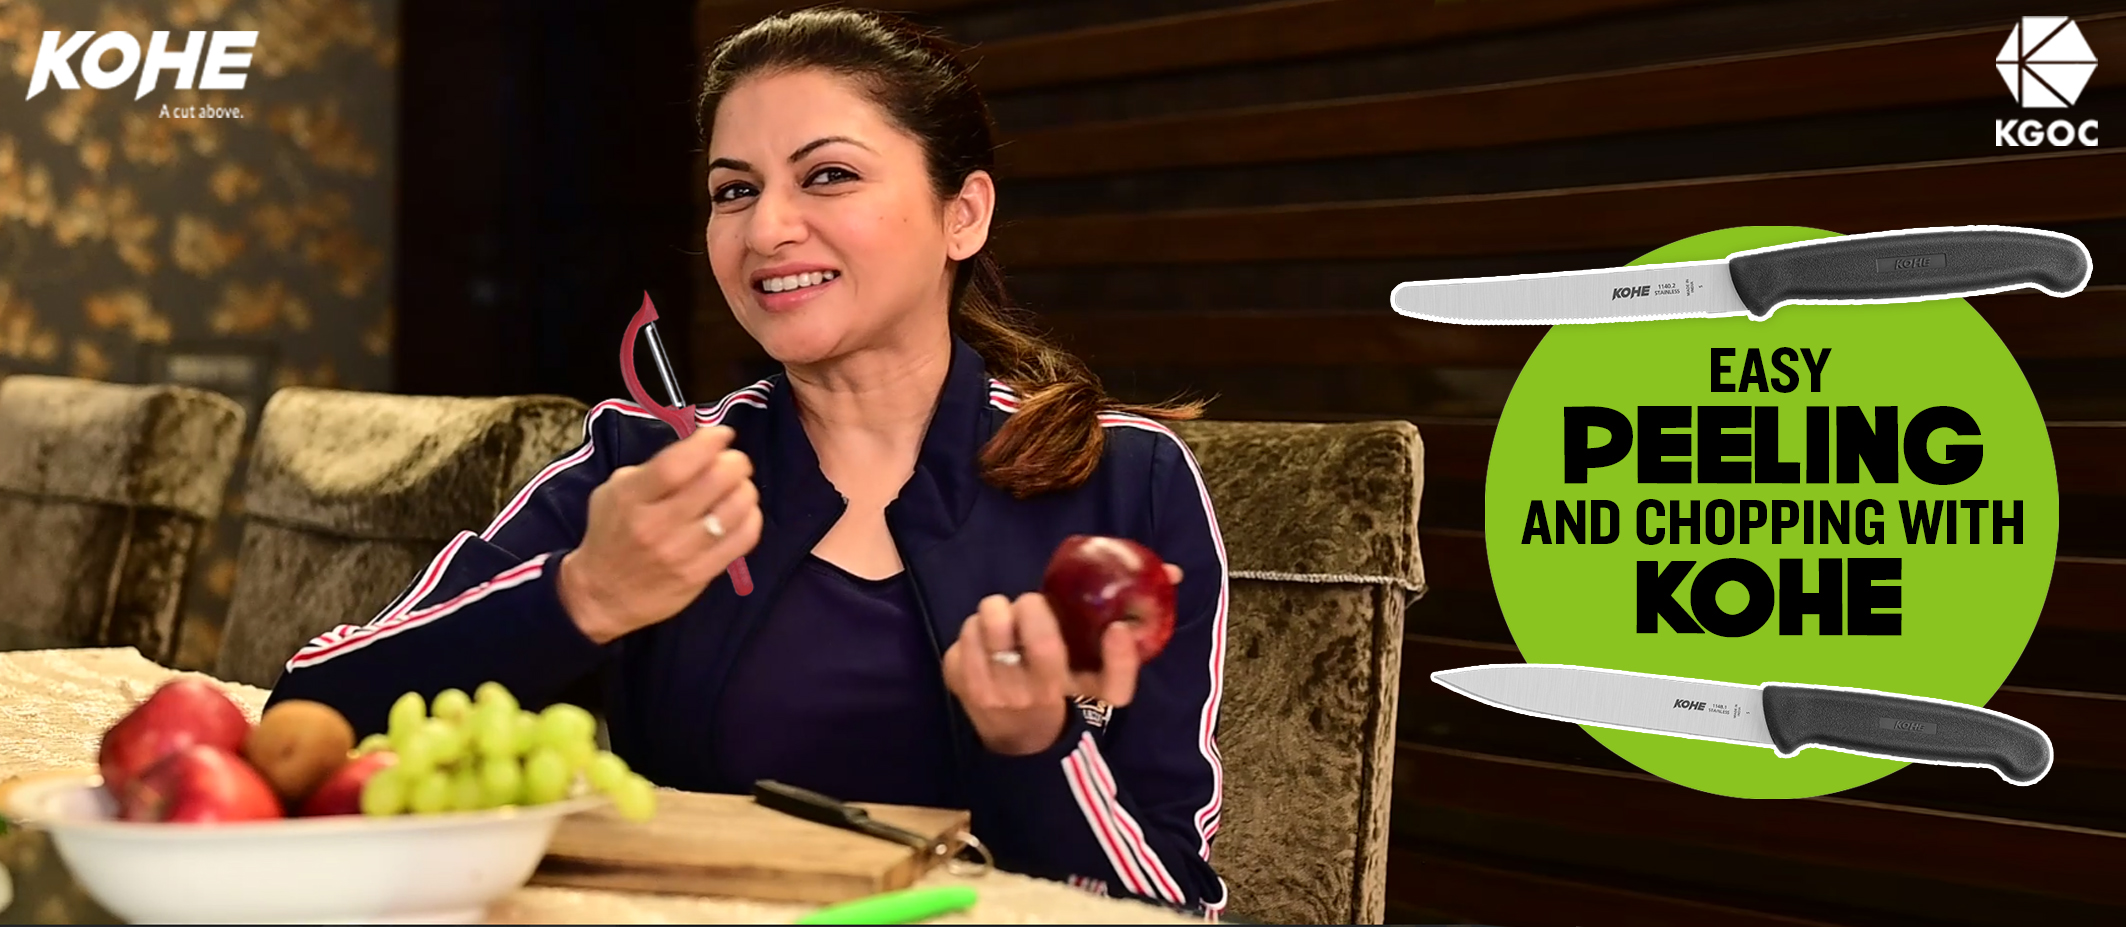 Kohe is Bhagyashree's kitchen partner, tune in to the video for insight.